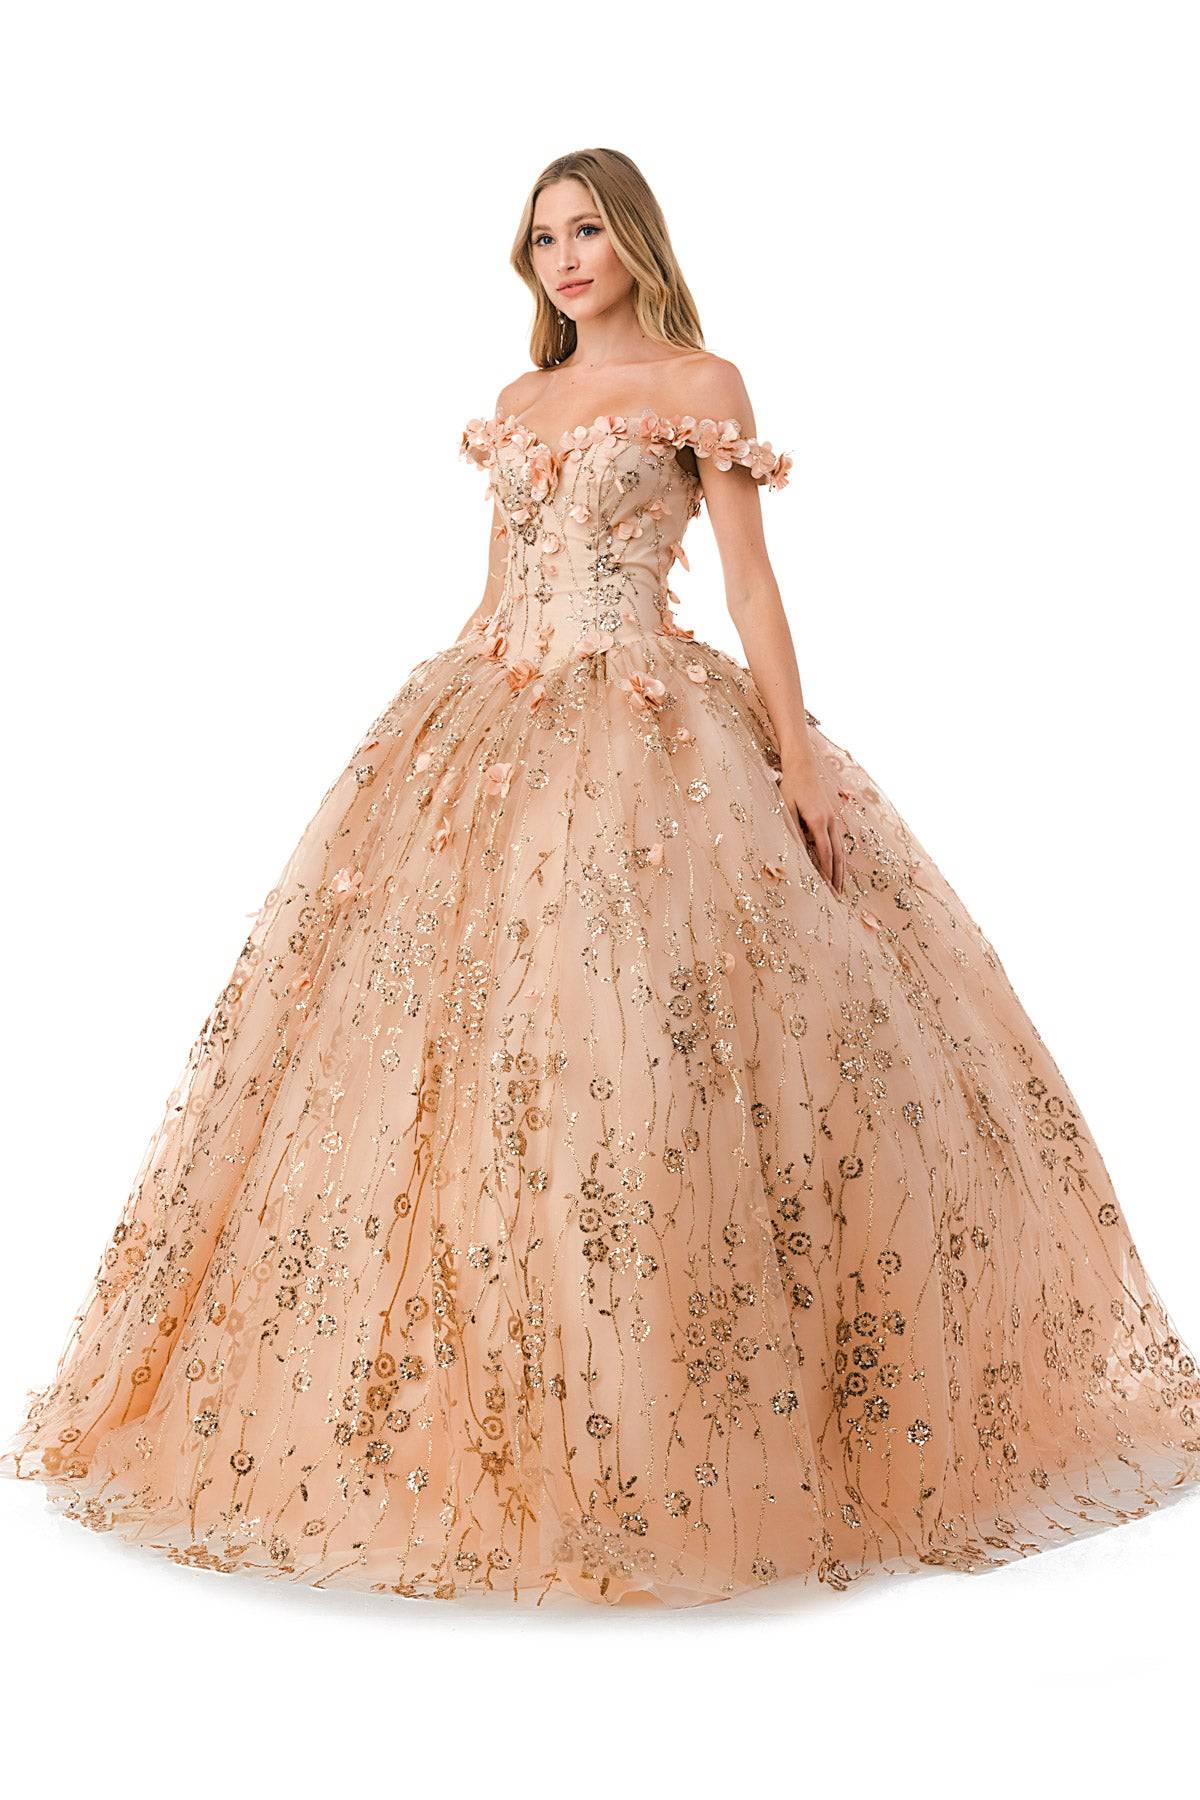 Aspeed L2766A Gorgeous Rose Gold Floral Inspired Quinceanera Dress - NORMA REED